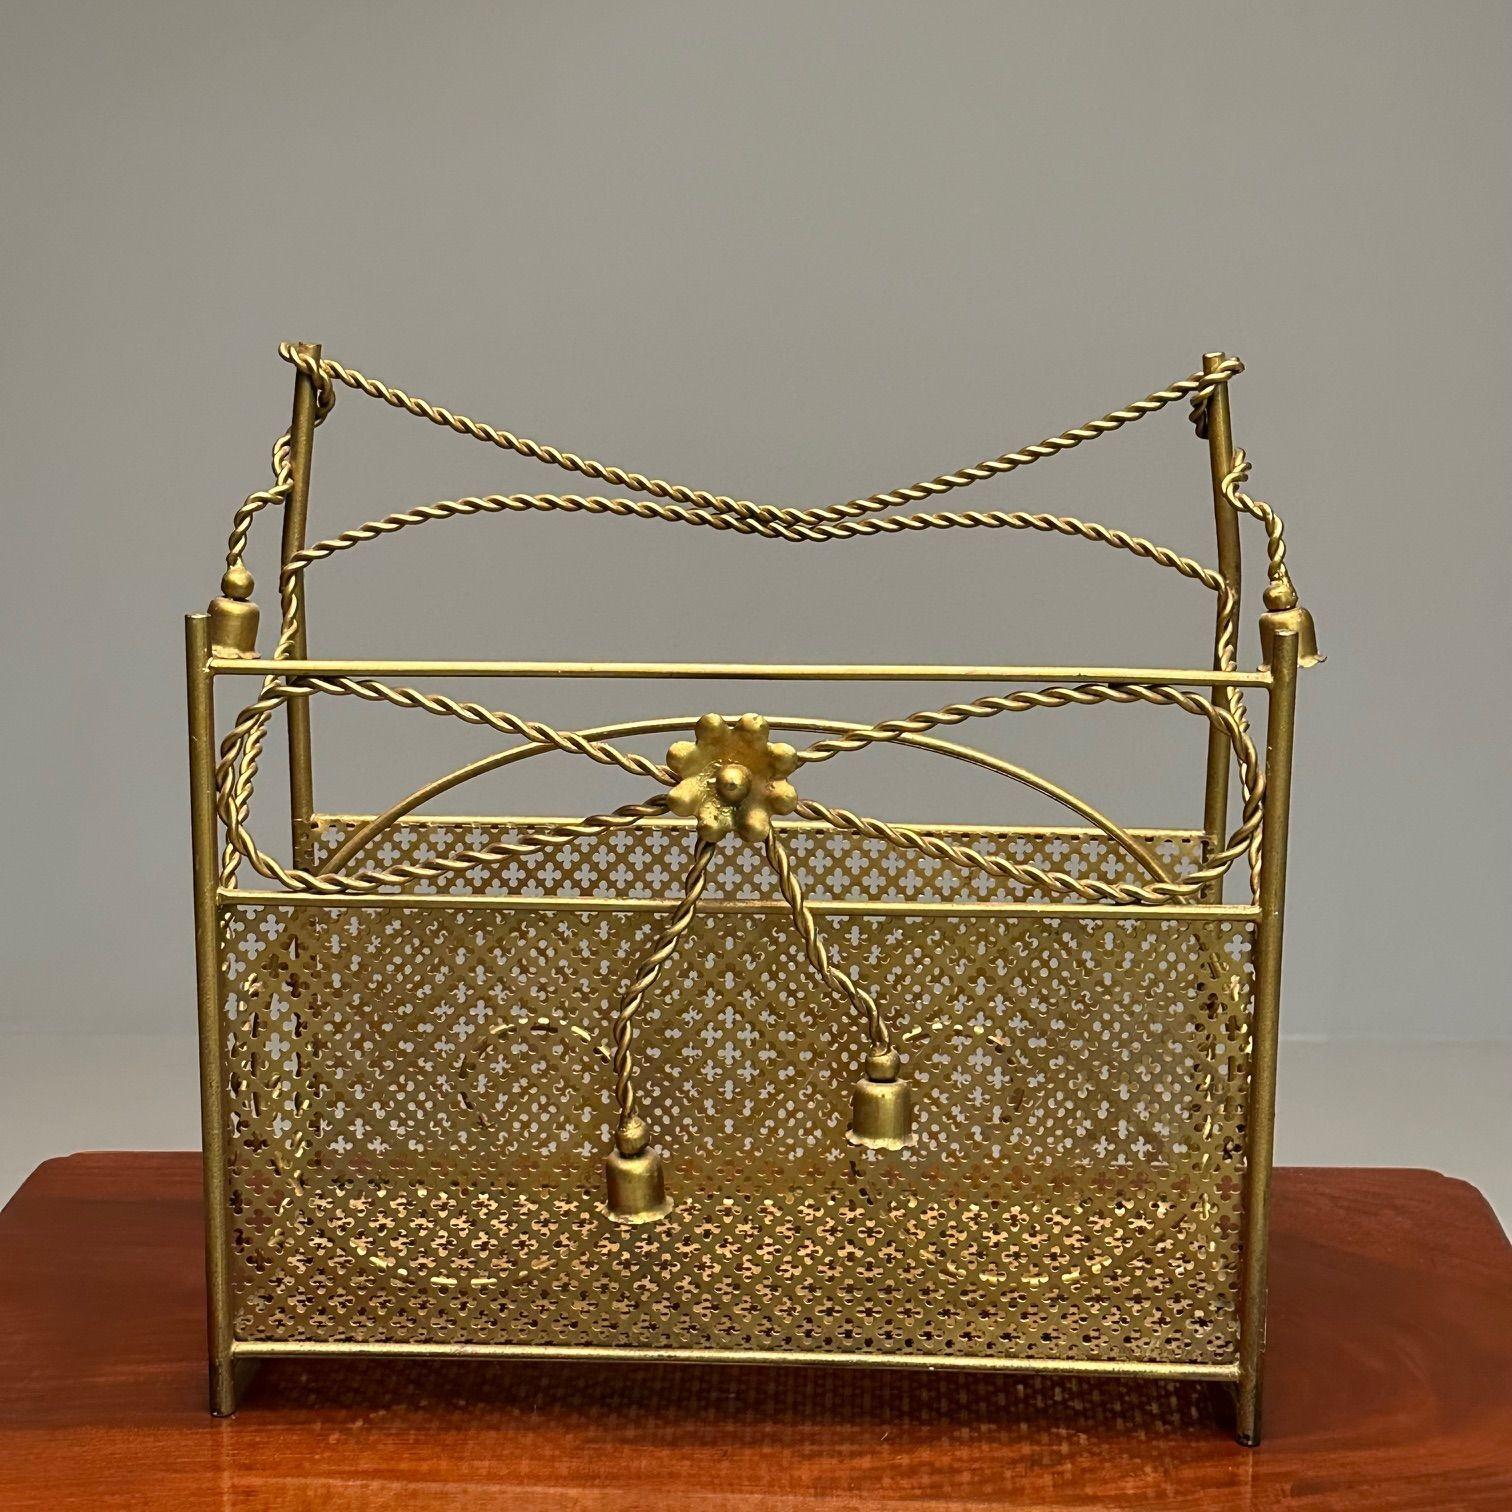 Hollywood Regency Gilt Bronze Magazine Rack, Rope an Tassel Form

The case having sections in a mesh brass design.

Height: 17